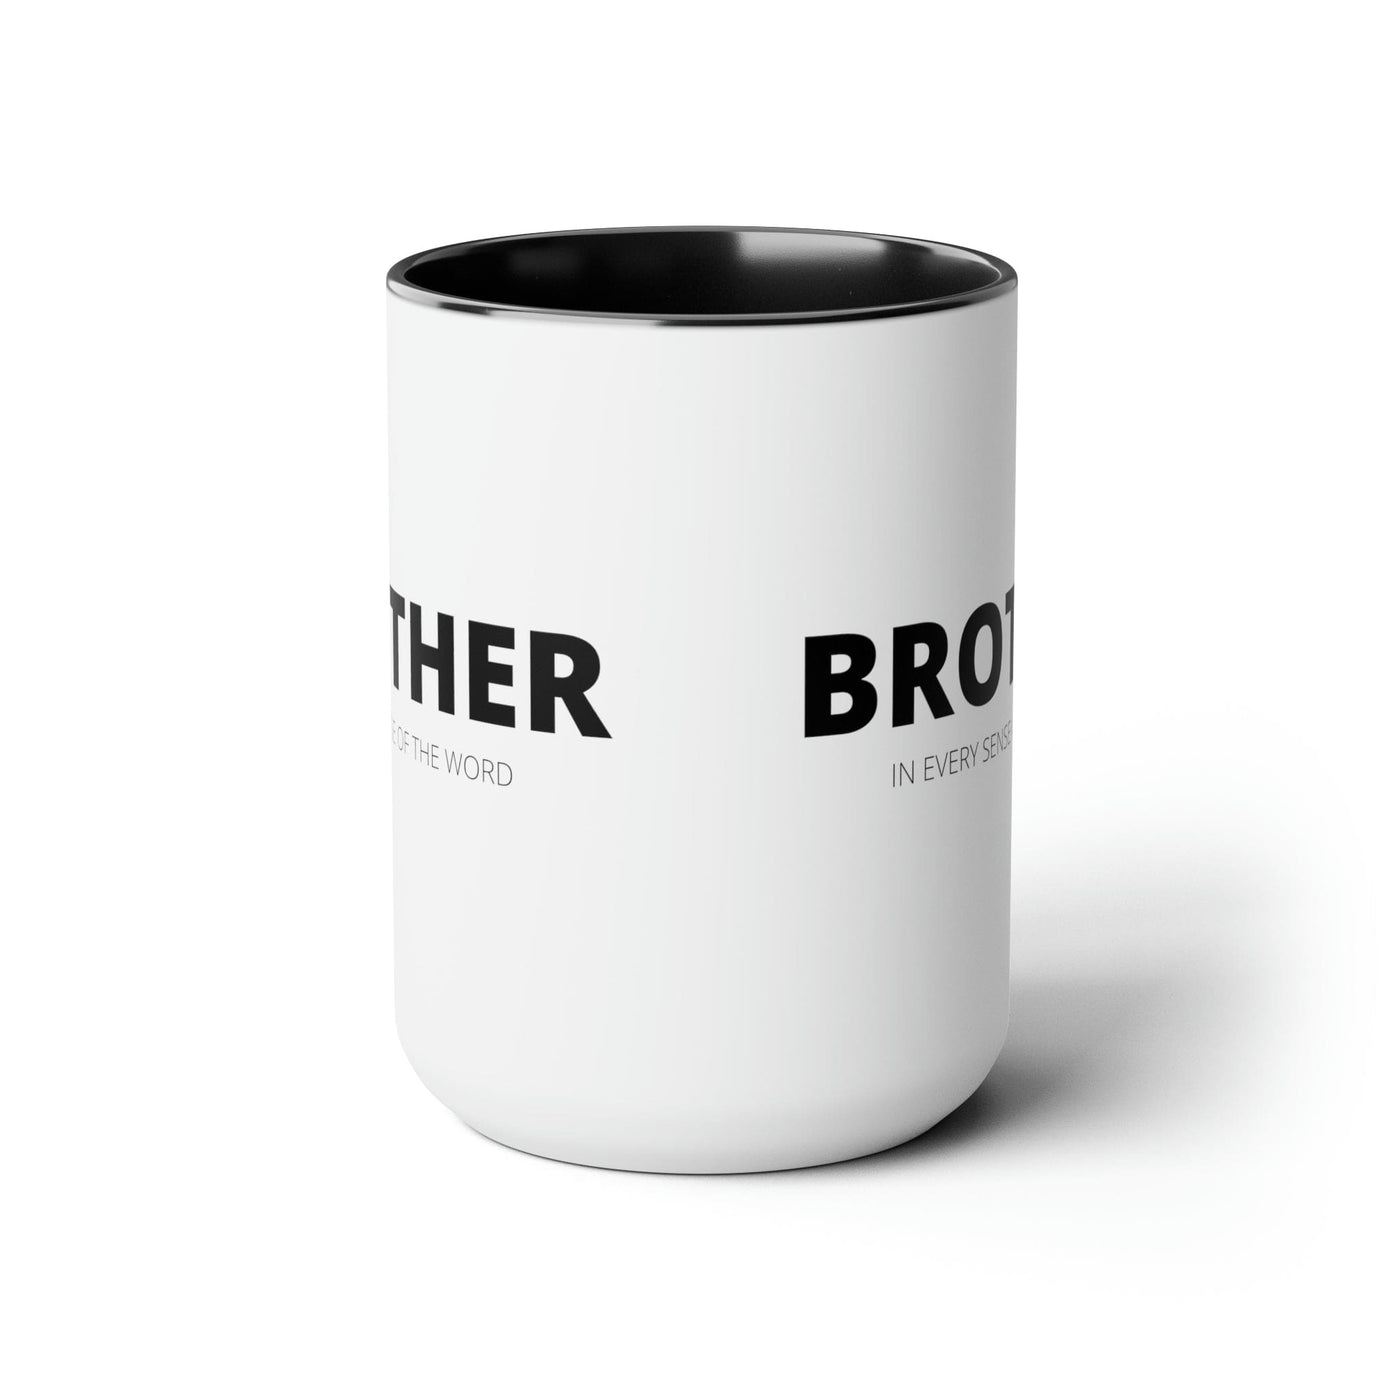 Accent Ceramic Coffee Mug 15oz - Say It Soul Brother (in Every Sense